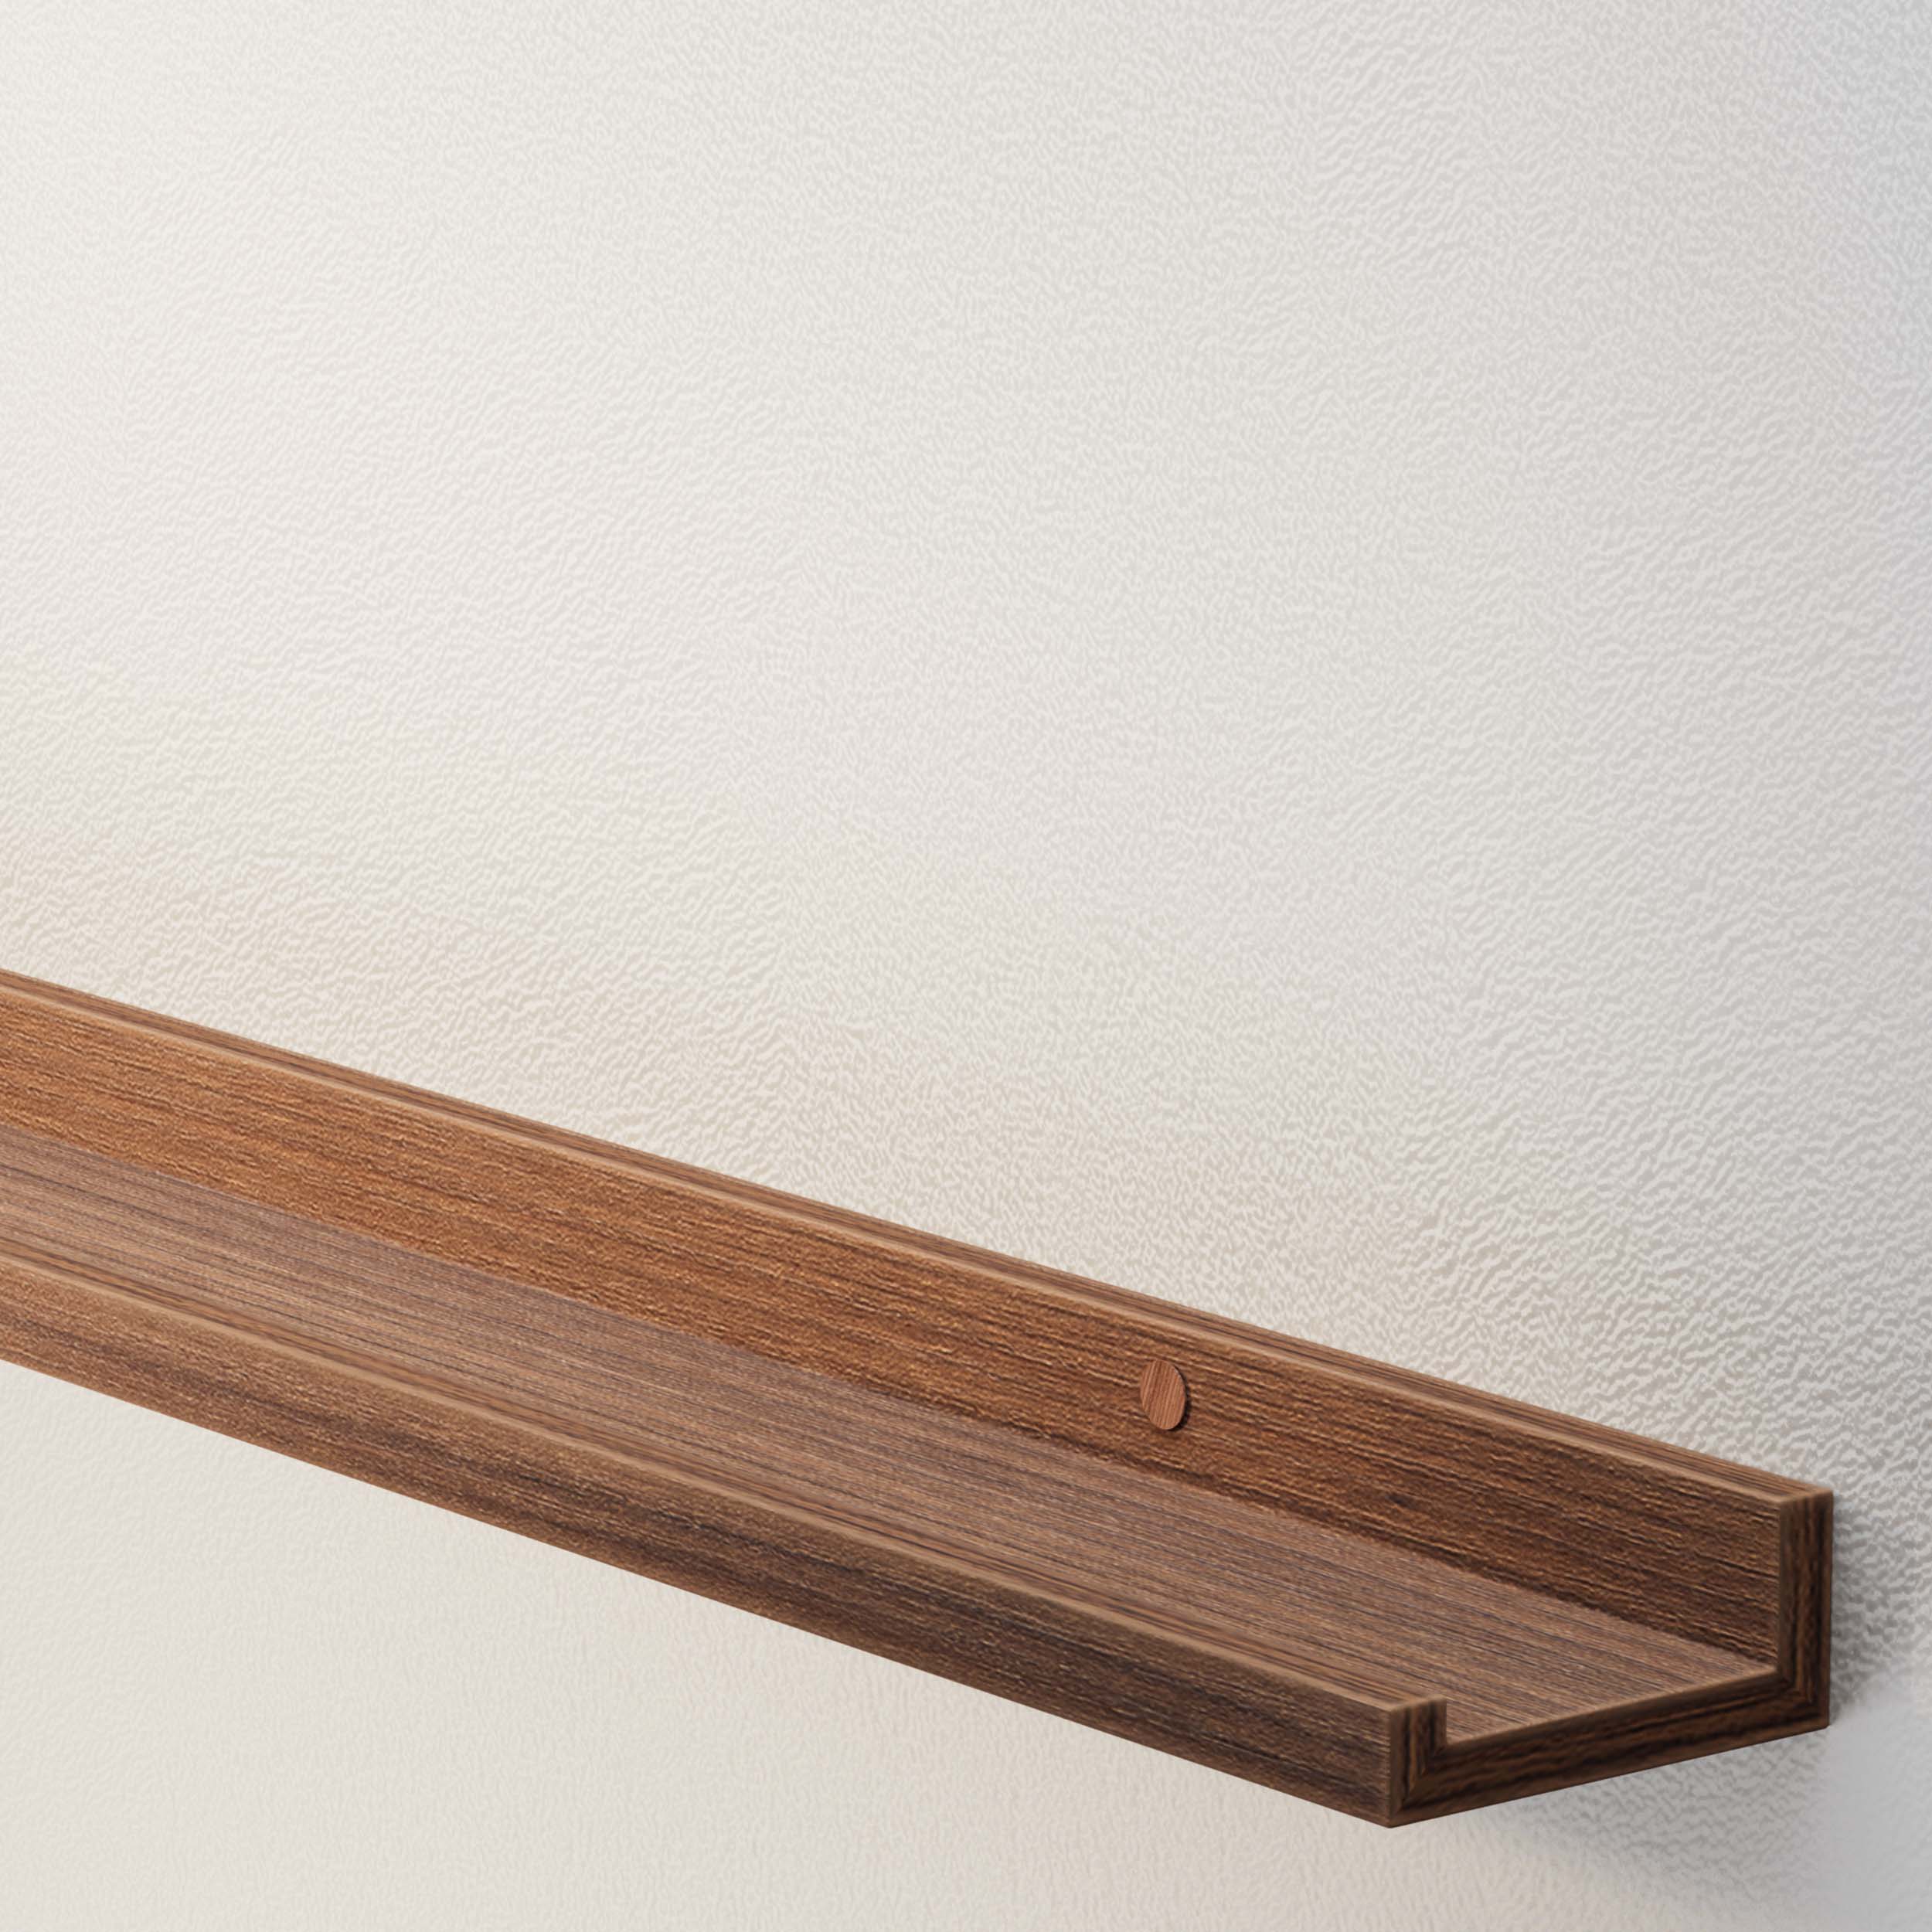 An empty long shelf for wall walnut against a textured wall, showcasing the ledge's simplicity and clean design.